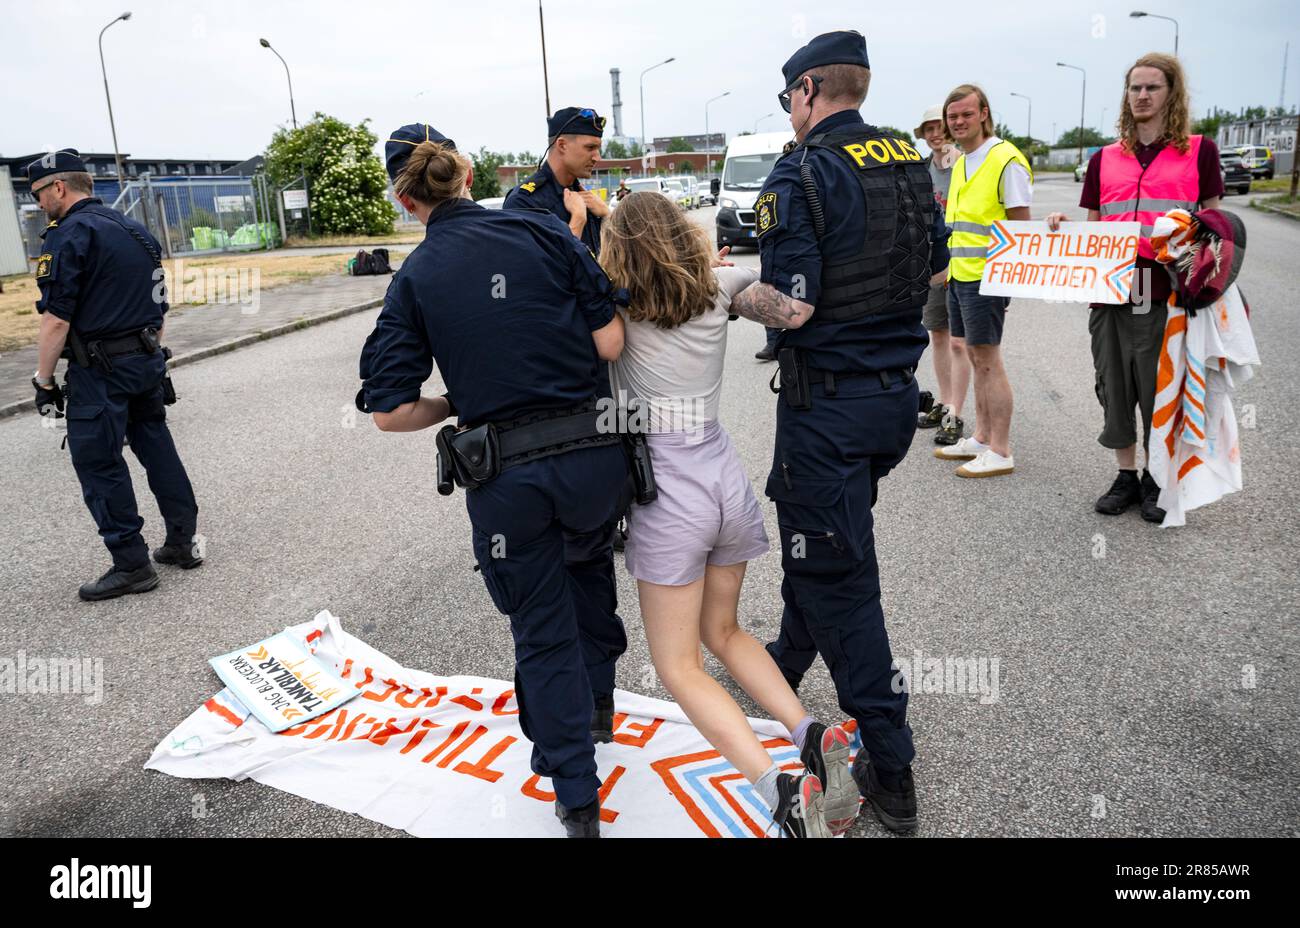 Malmo, Sweden. 19th June, 2023. Police remove Greta Thunberg as they move climate activists from the organization Ta Tillbaka Framtiden, who are blocking the entrance to Oljehamnen in Malmo, Sweden, on June 19, 2023, for the 5th day in a row. Photo: Johan Nilsson/TT/Code 50090 Credit: TT News Agency/Alamy Live News Credit: TT News Agency/Alamy Live News Stock Photo